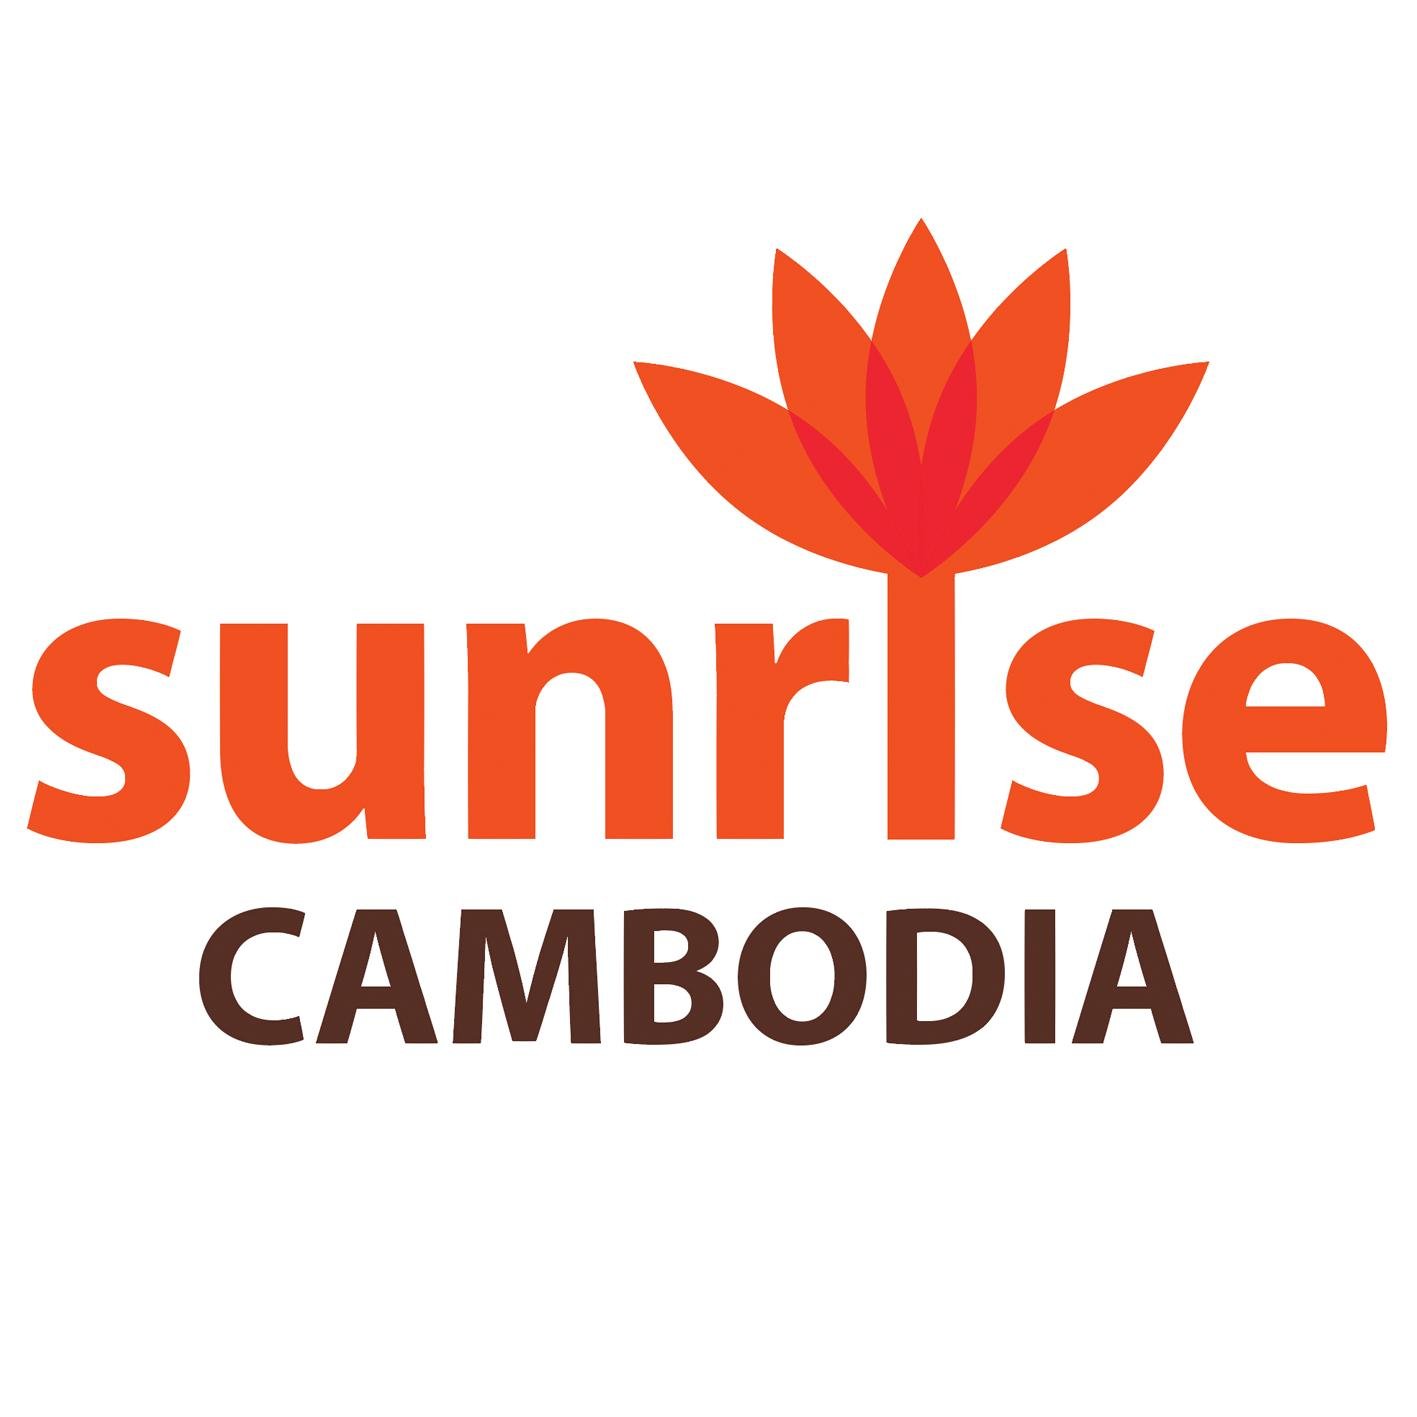 Sunrise Cambodia is an organisation with a focus on Cambodia’s most vulnerable children and the communities in which they live.